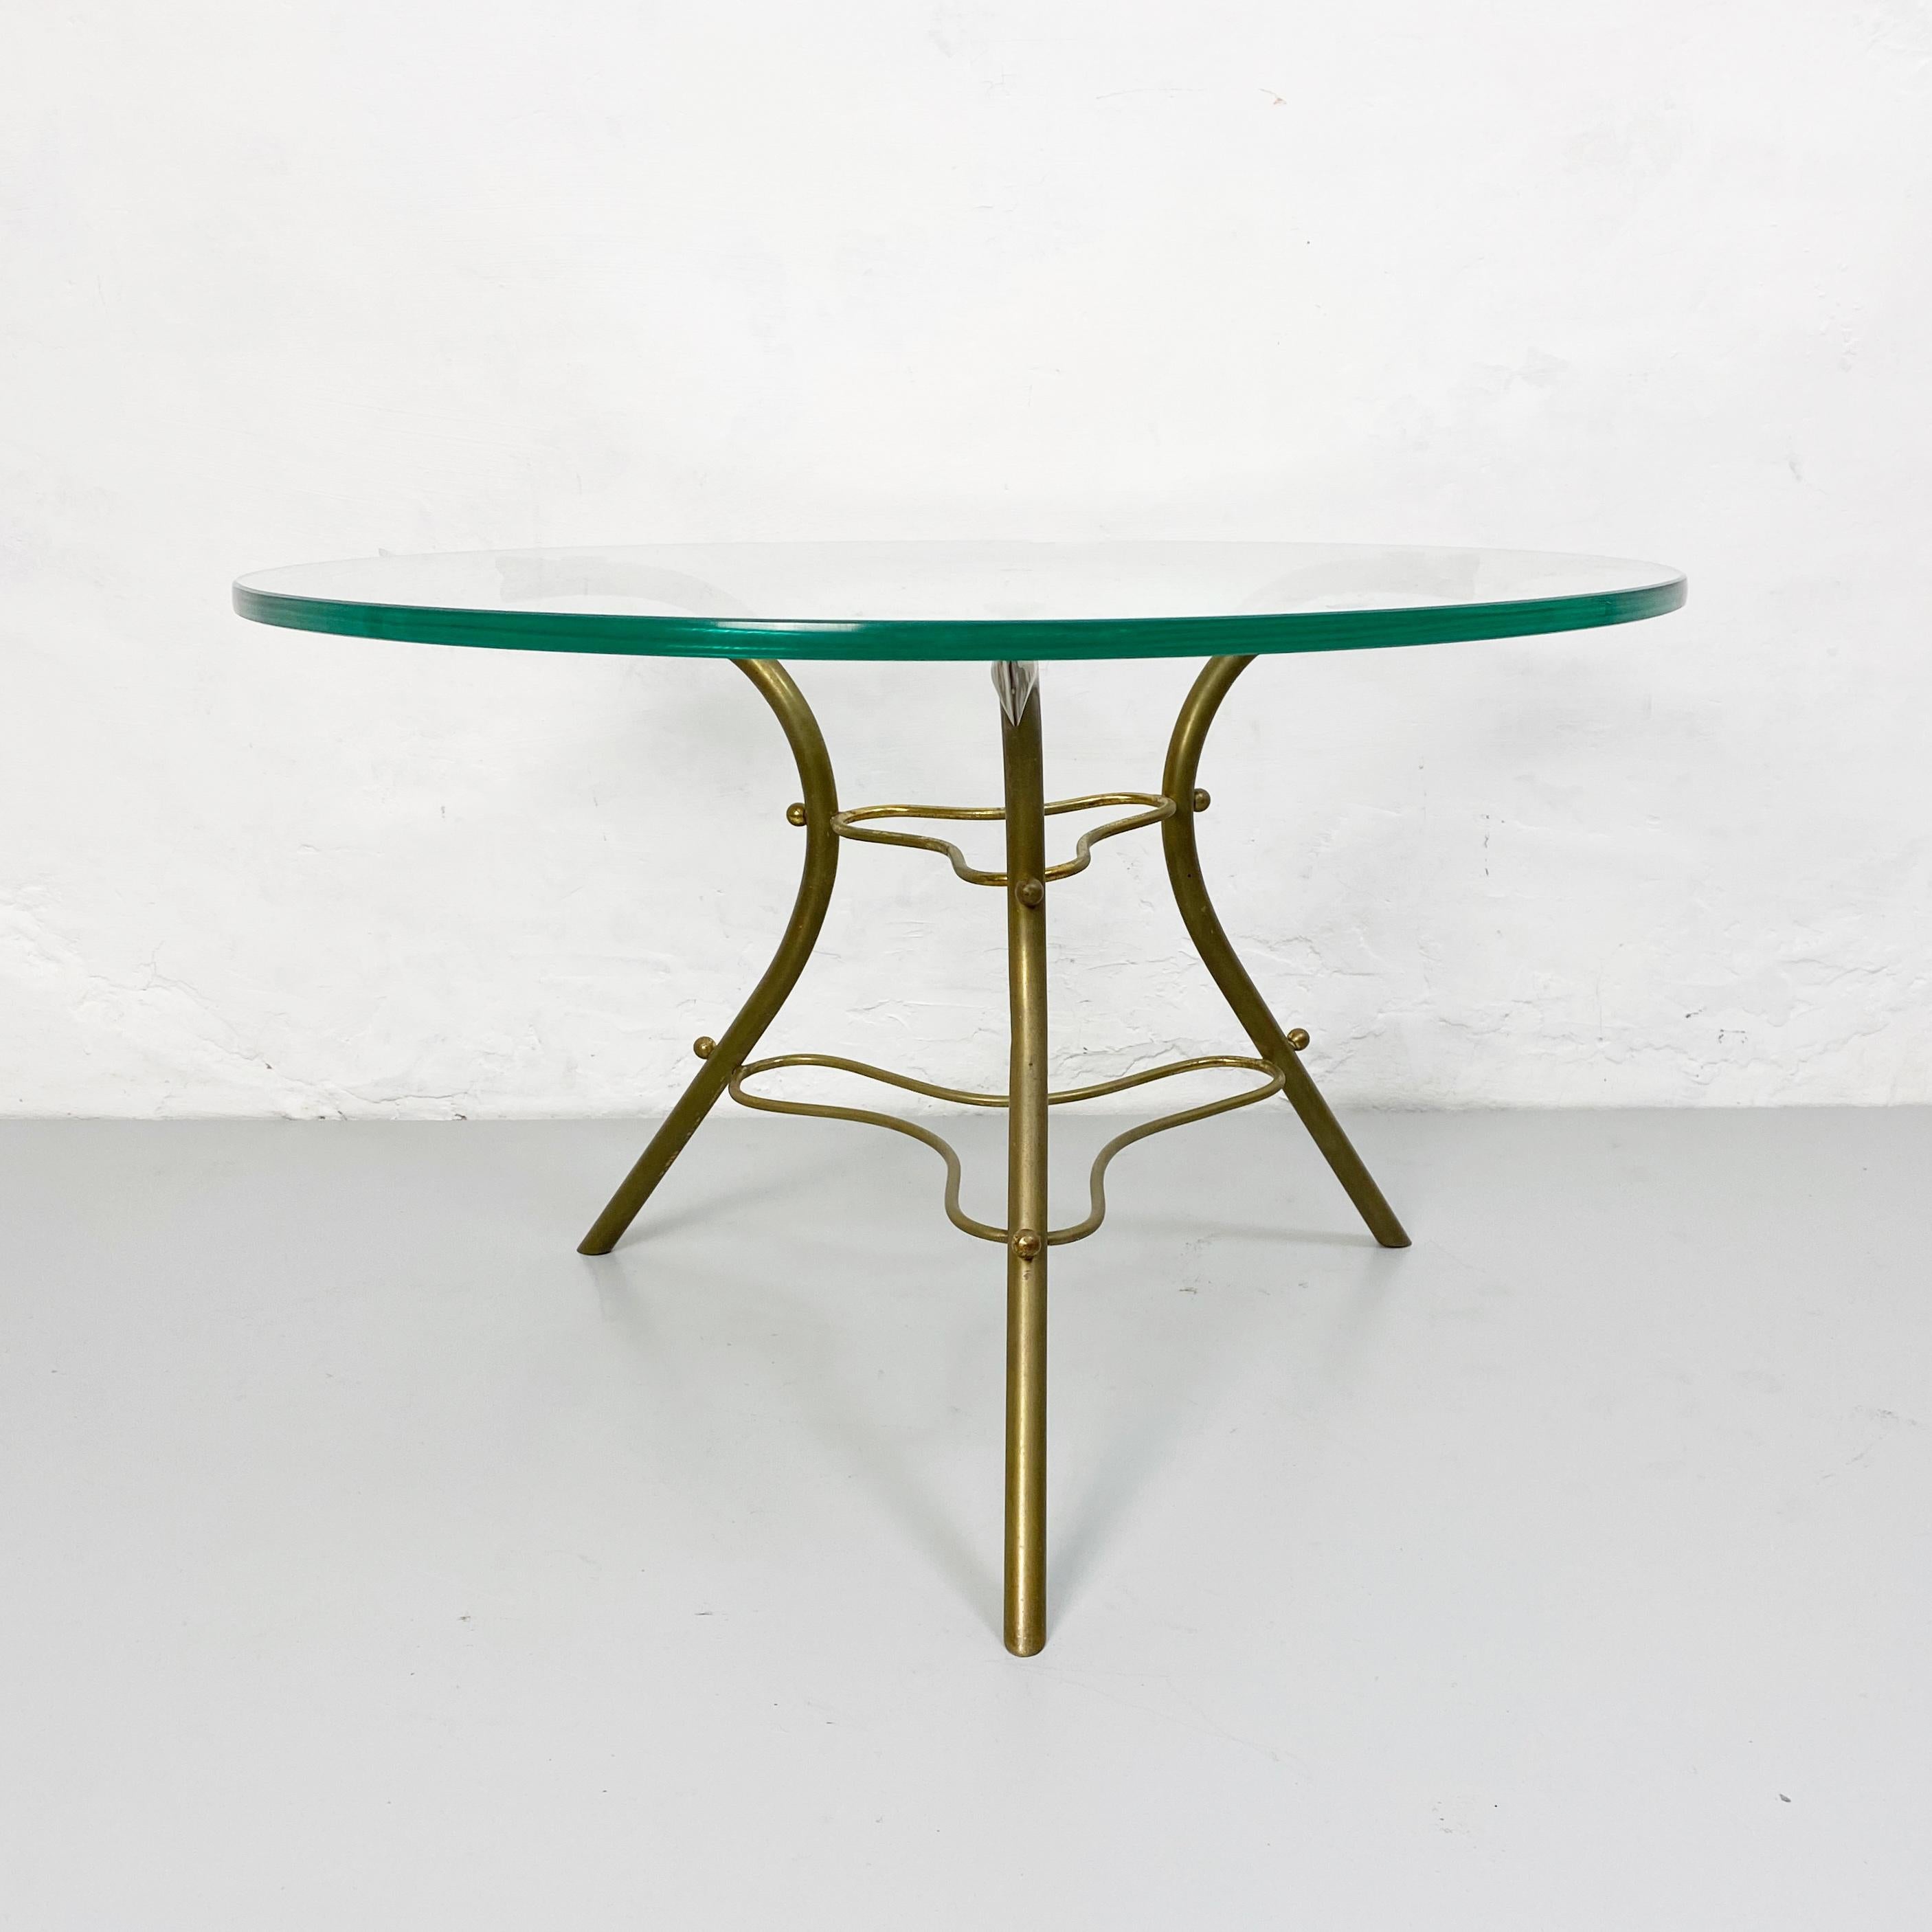 Coffee table with irregular brass road base, 1950s
Coffee table with circular top in transparent glass and irregular base in brass rod.

1950s

Good conditions

Measurements in cm 60Dx39H.